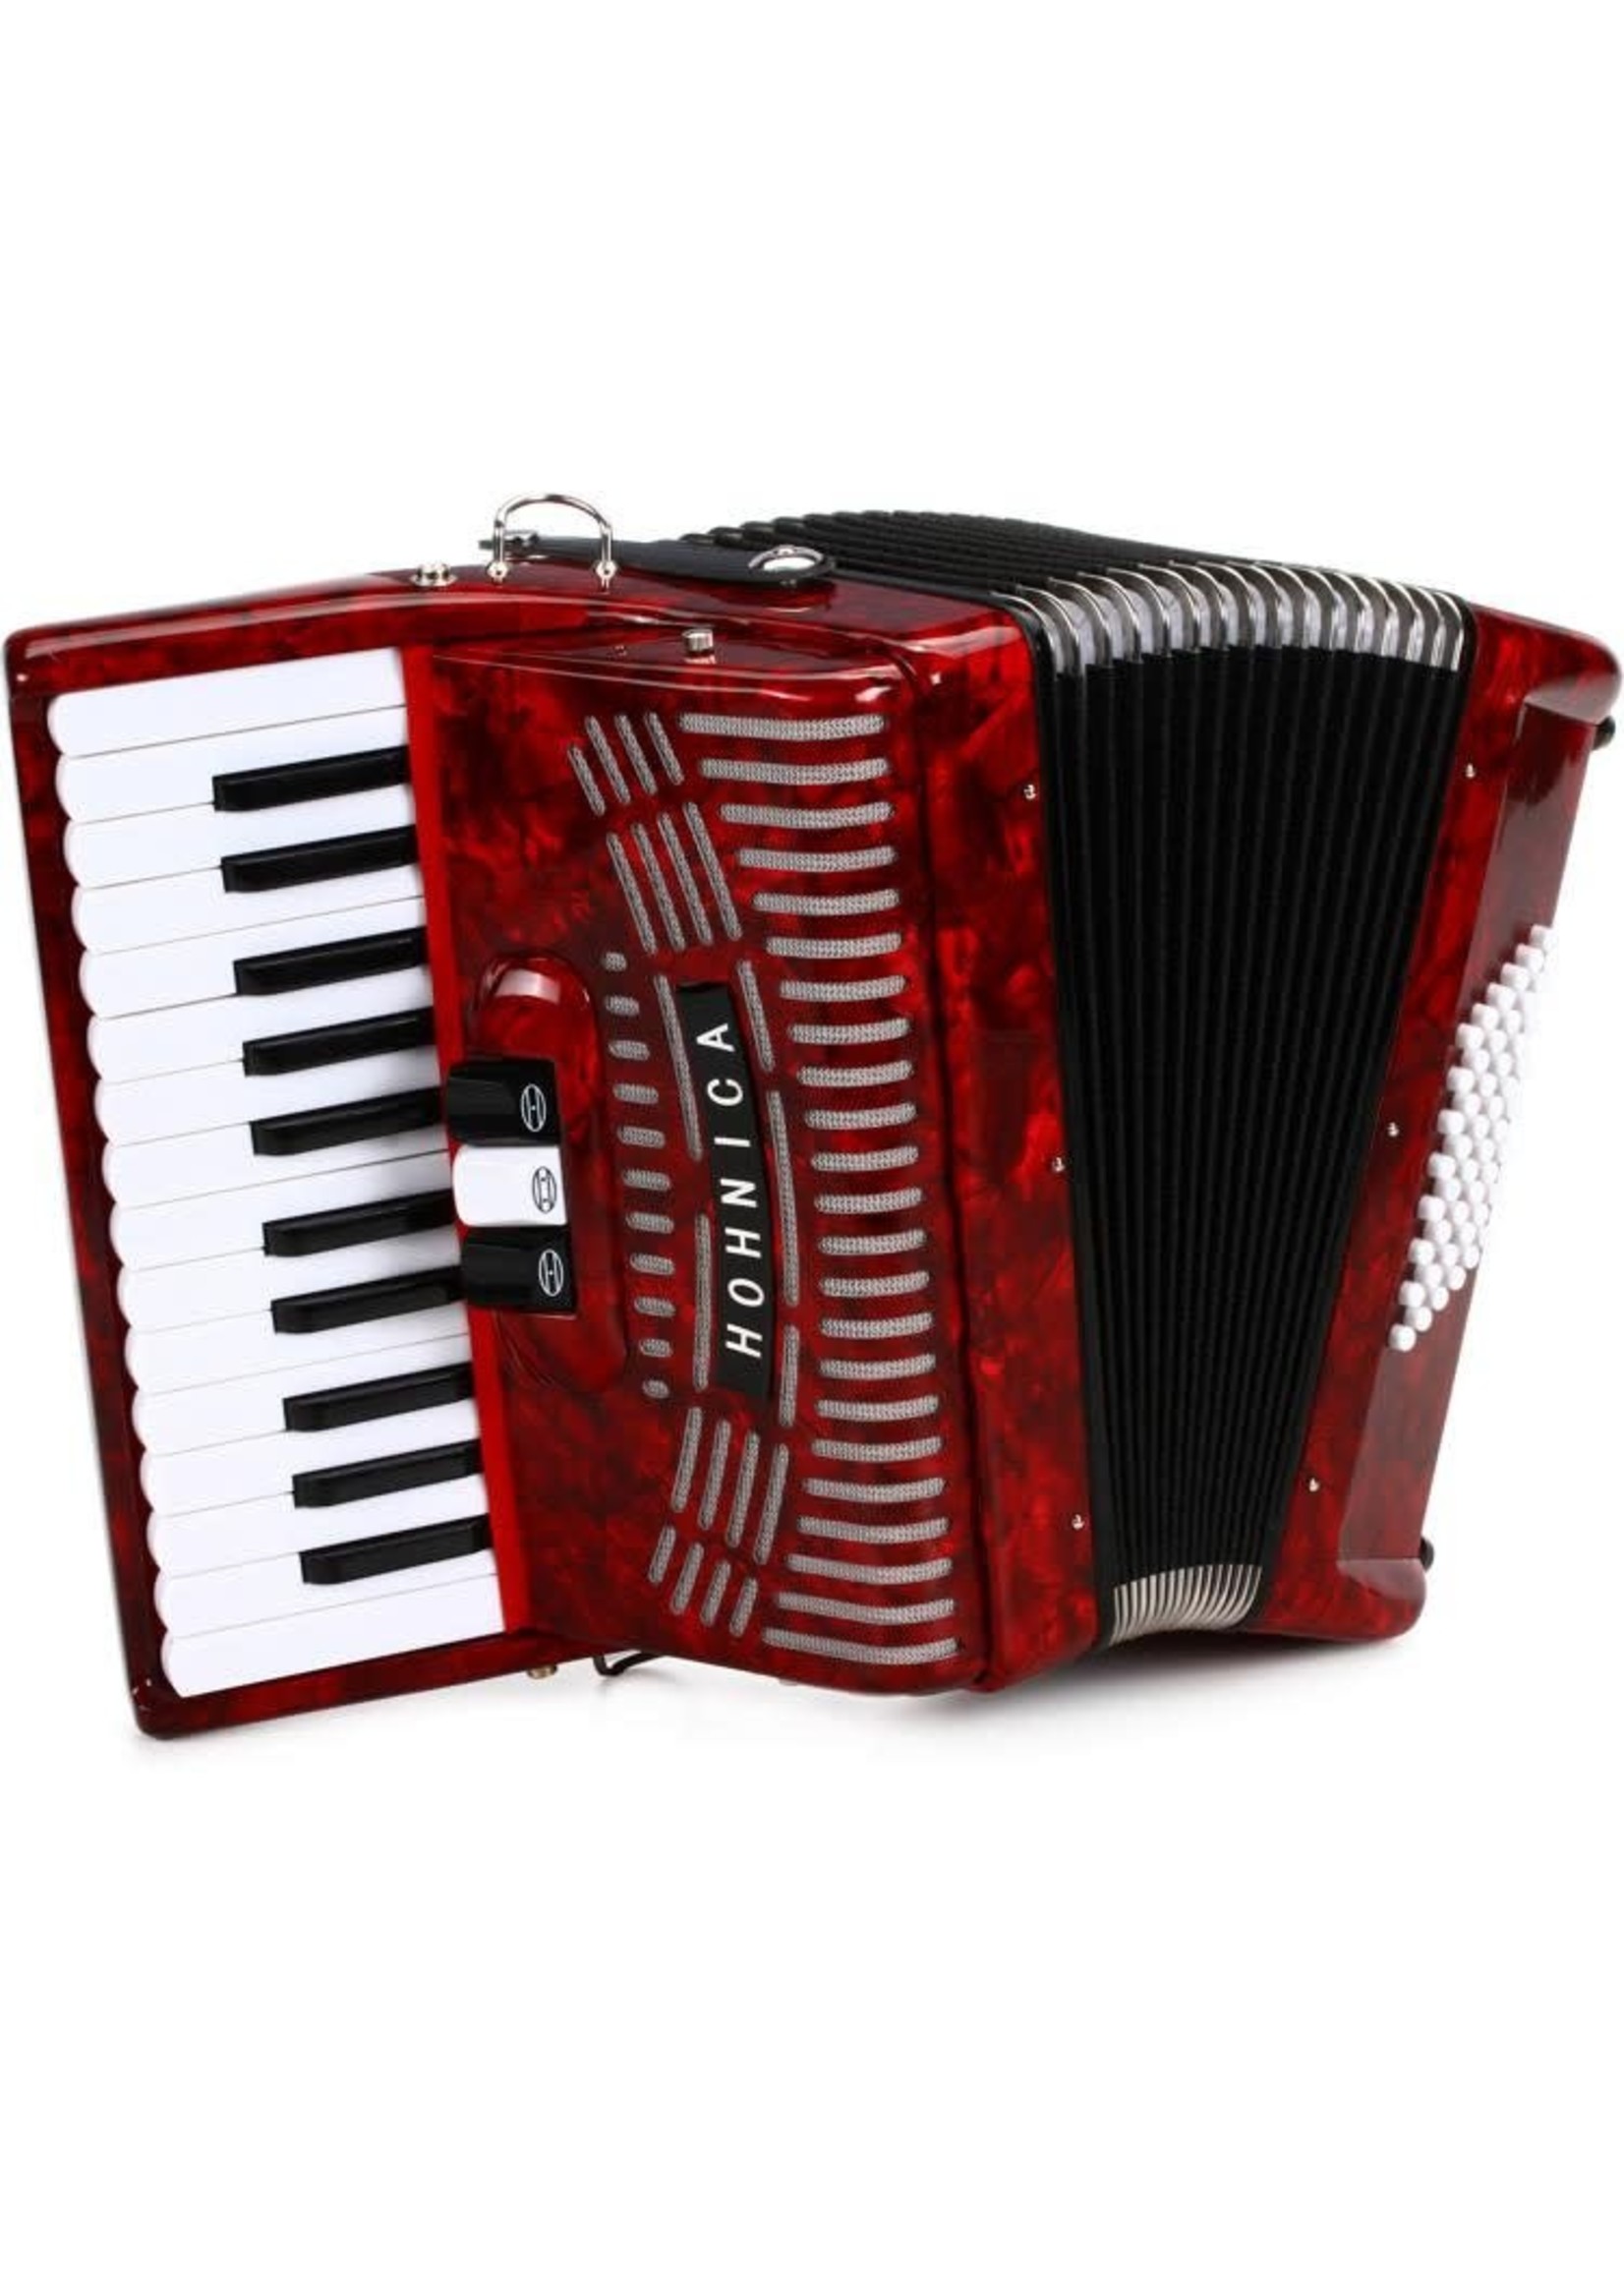 Hohner Hohner Hohnica 1304-Red 48 Bass Keyed Accordion, Pearl Red